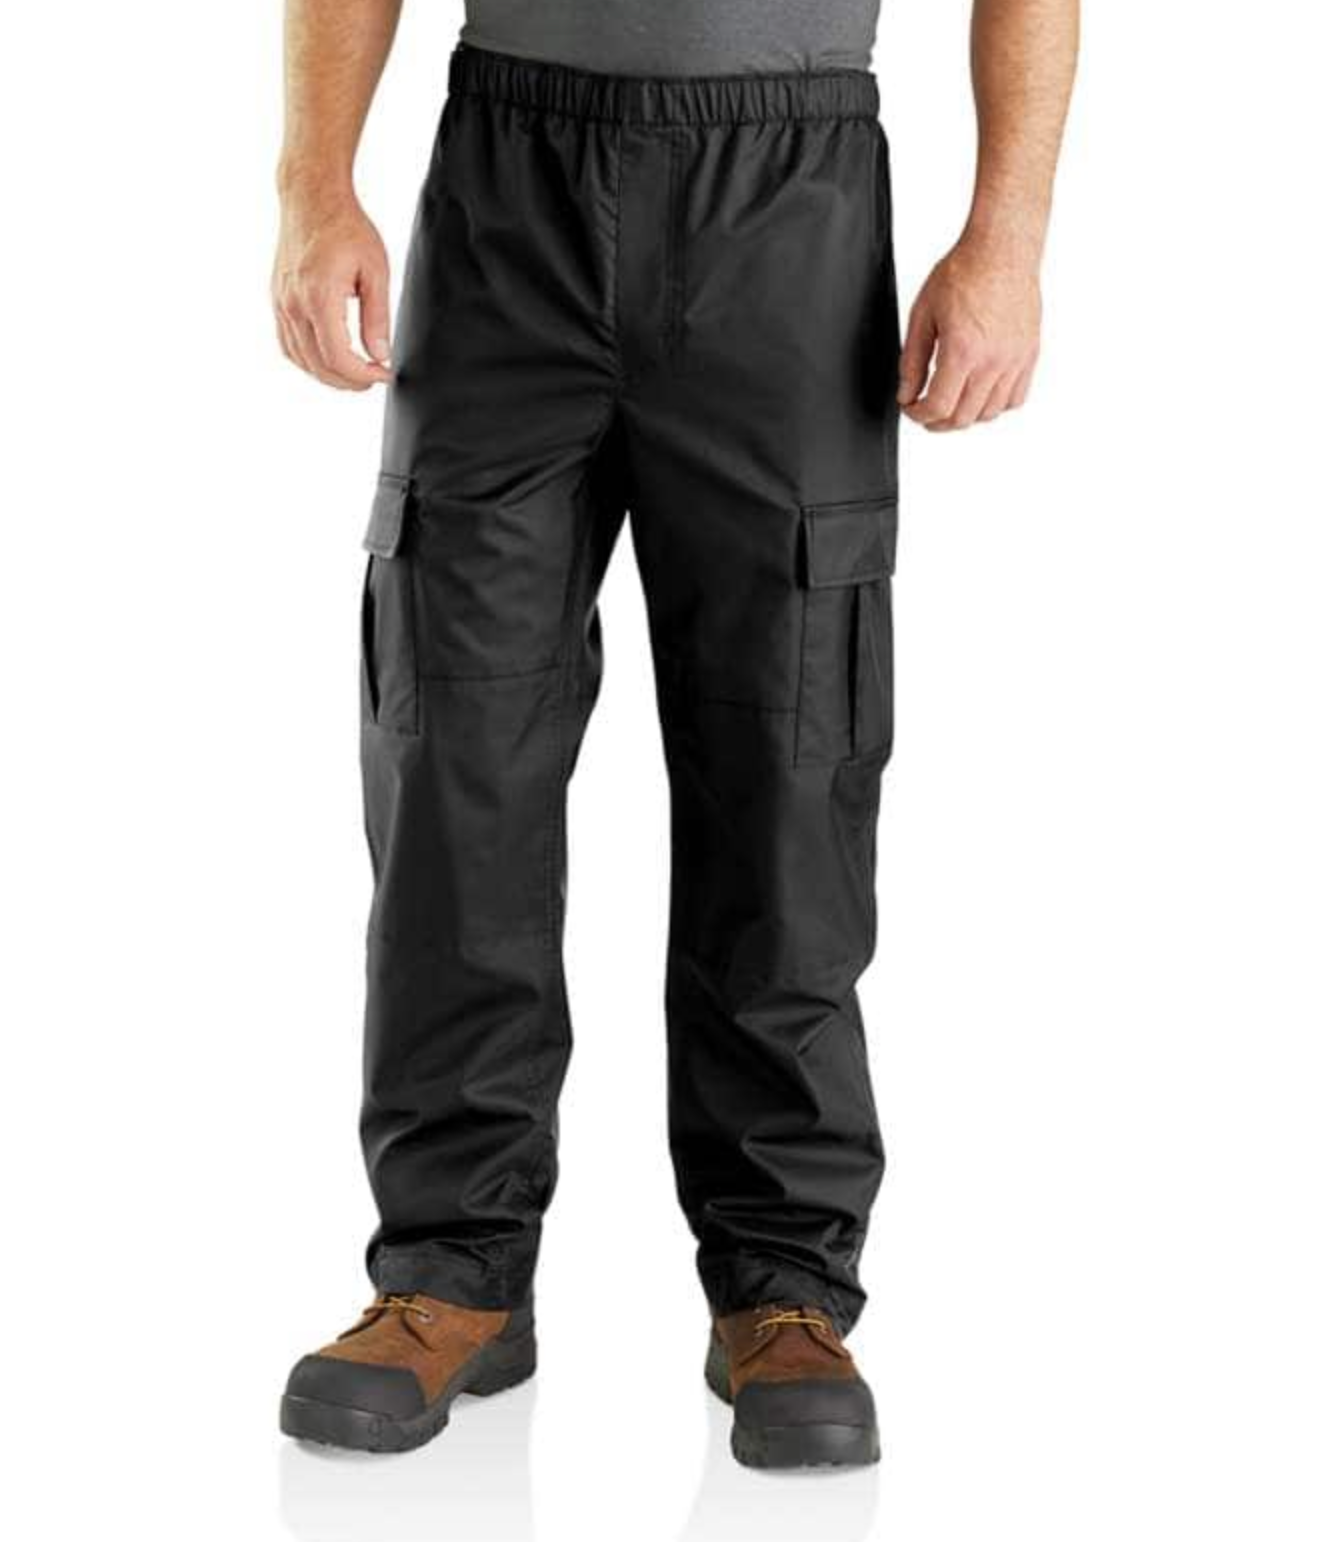  Carhartt Men's Storm Defender Loose Fit Heavyweight Pant,  Black, Small: Clothing, Shoes & Jewelry